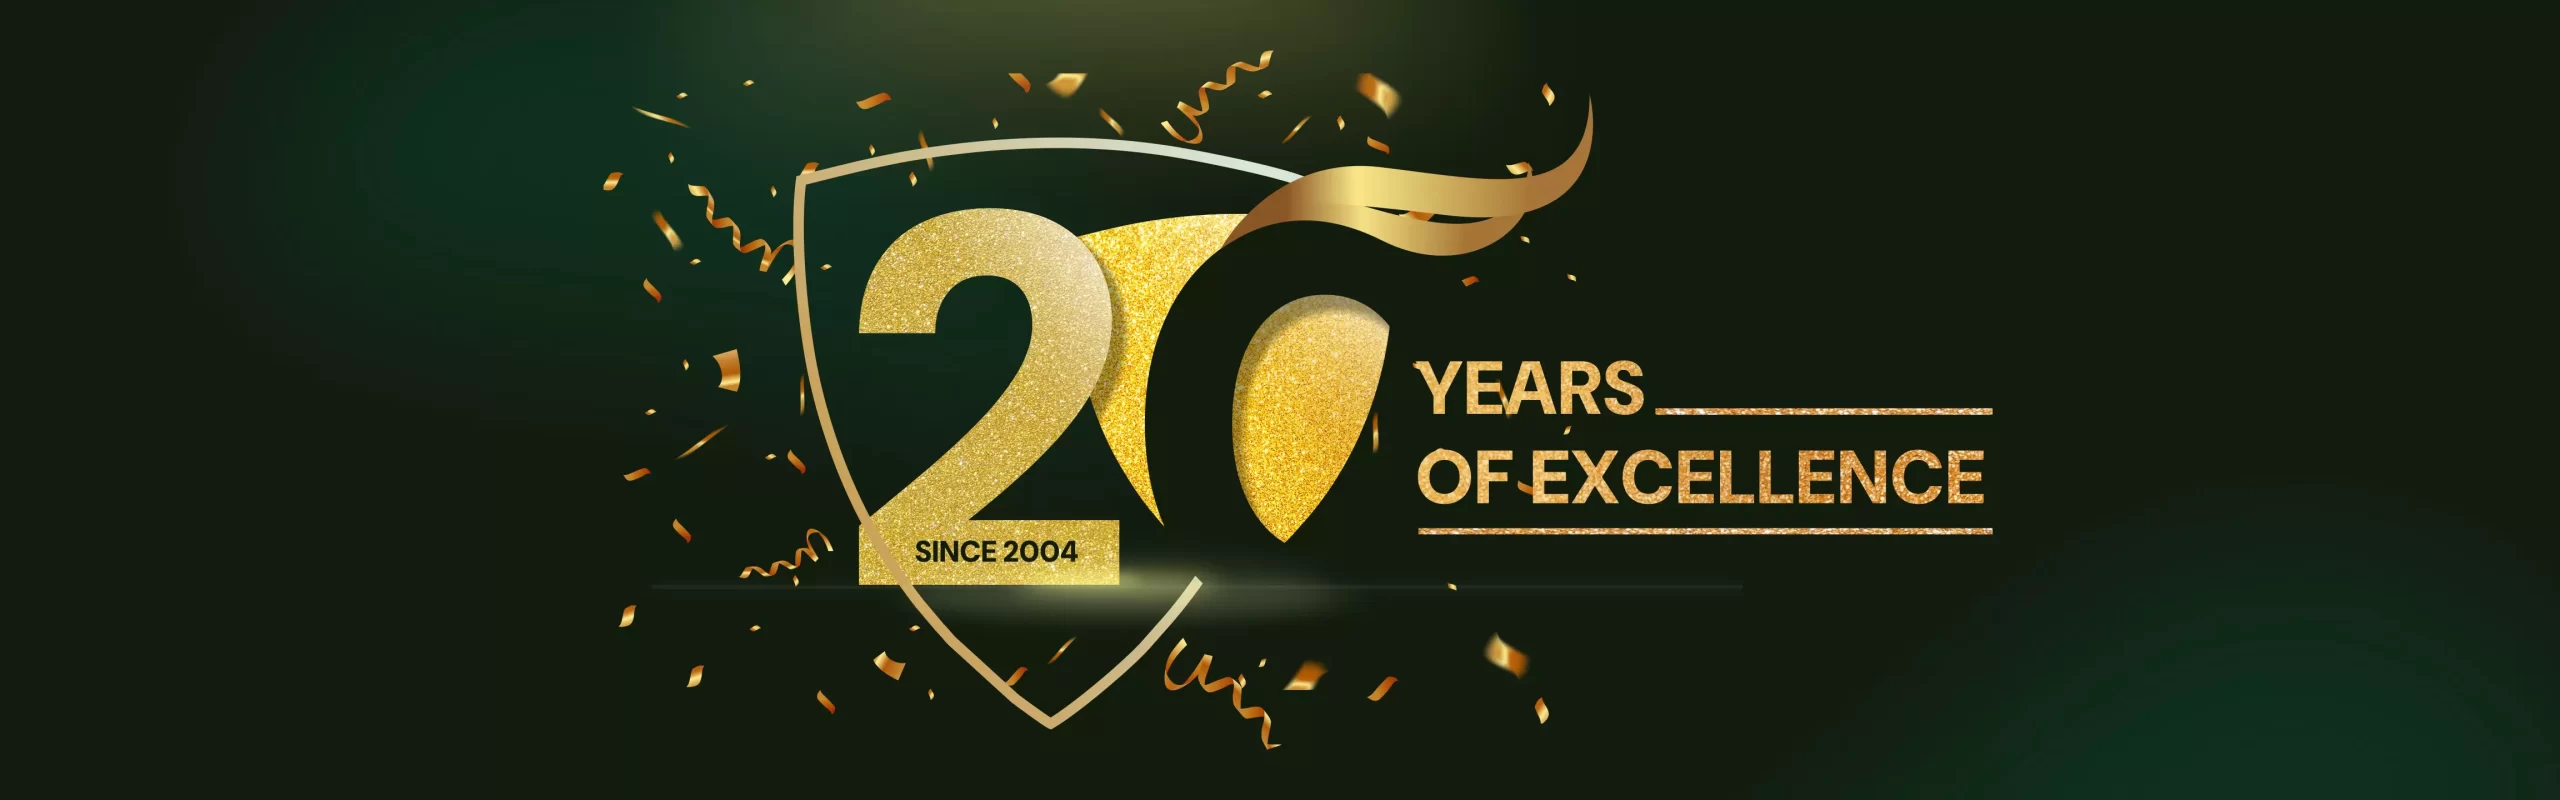 20 Years of Excellence Website Slider Banner